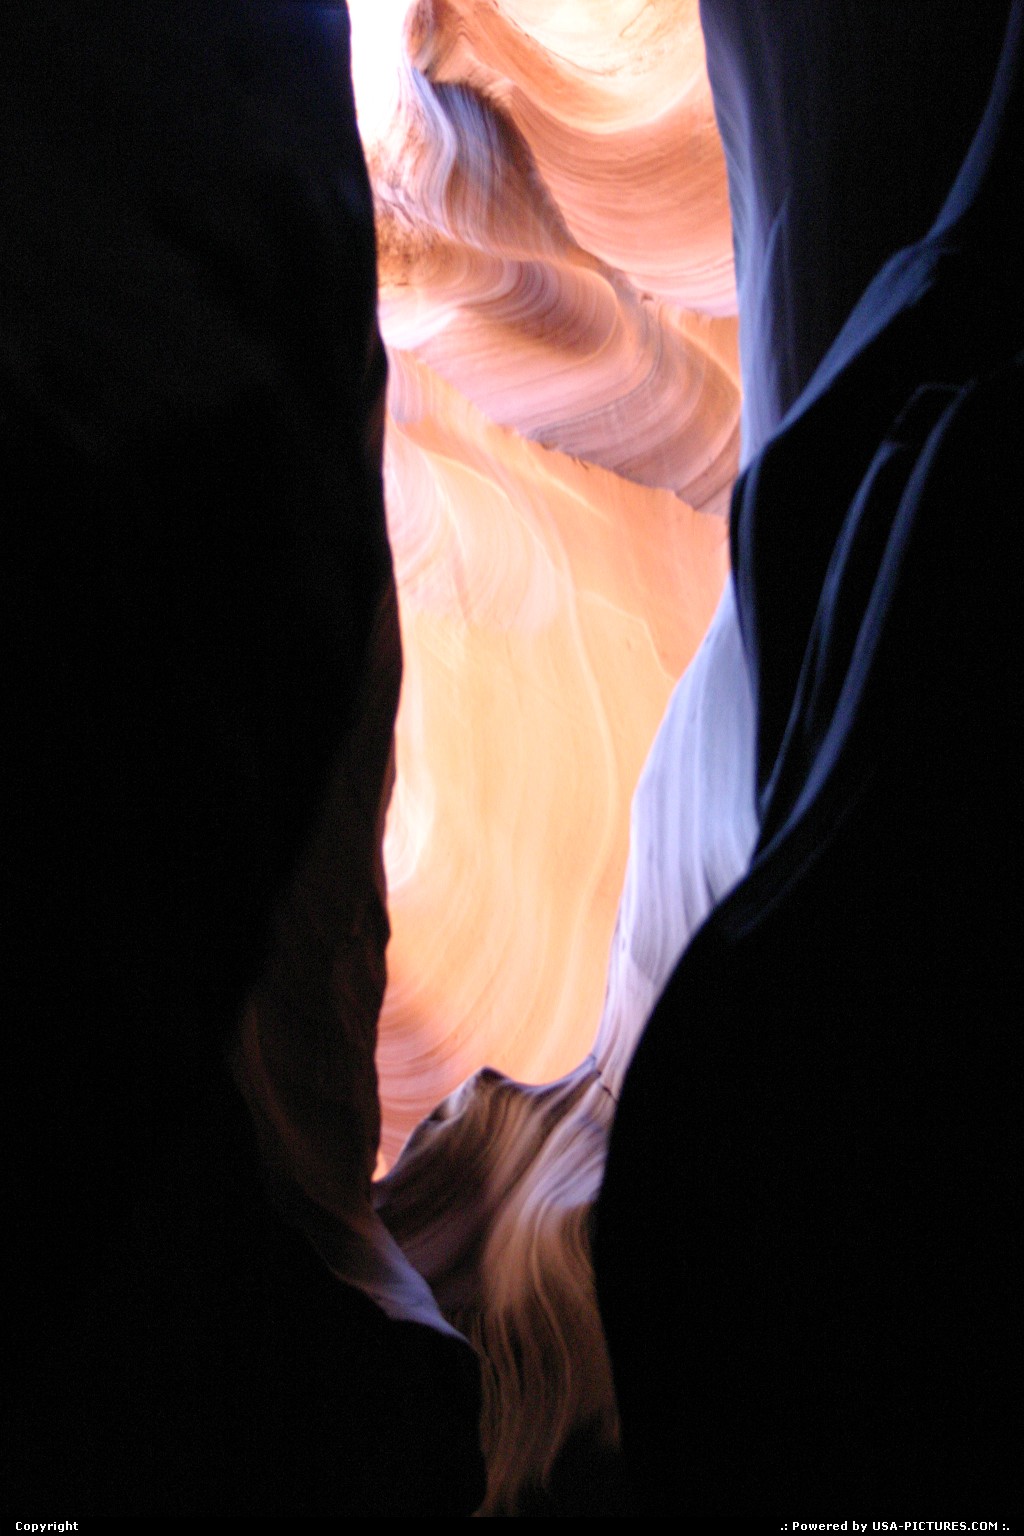 Picture by Mcb74: Page Arizona   antelope canyon